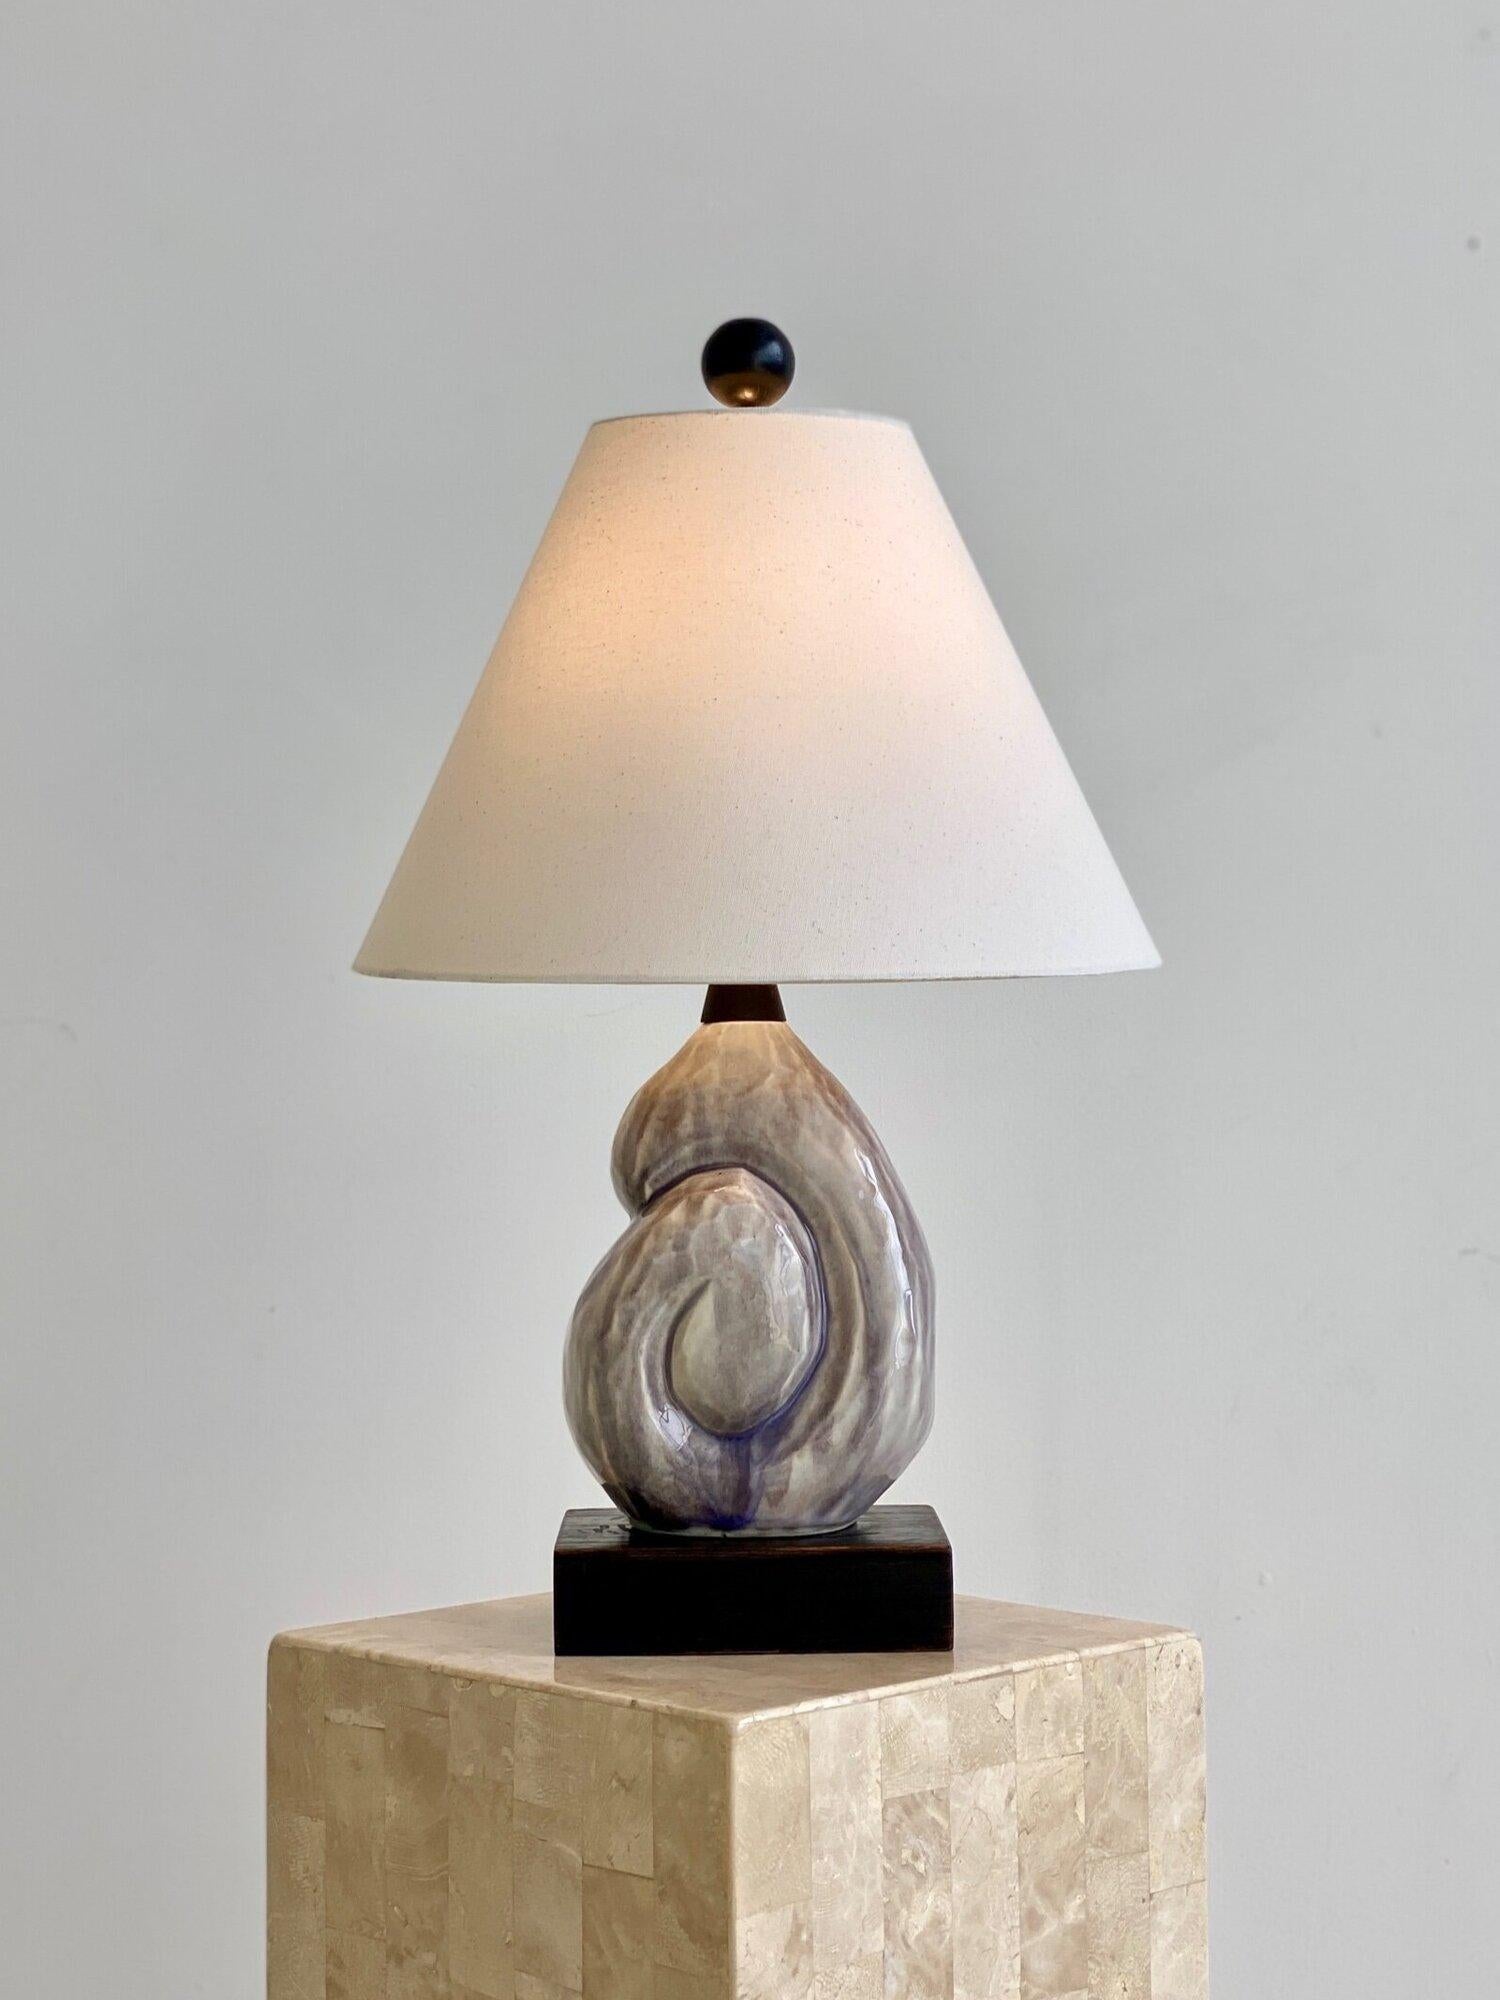 Rare Yasha Heifetz Mounted Lavender Glazed Ceramic Nautilus Shell Lamp, Circa 1950s. A beautiful biomorphic rendering of a nautilus shell with mottled surface, glazed in shades of lavender and cool gray. The glaze selection helps to accentuate the